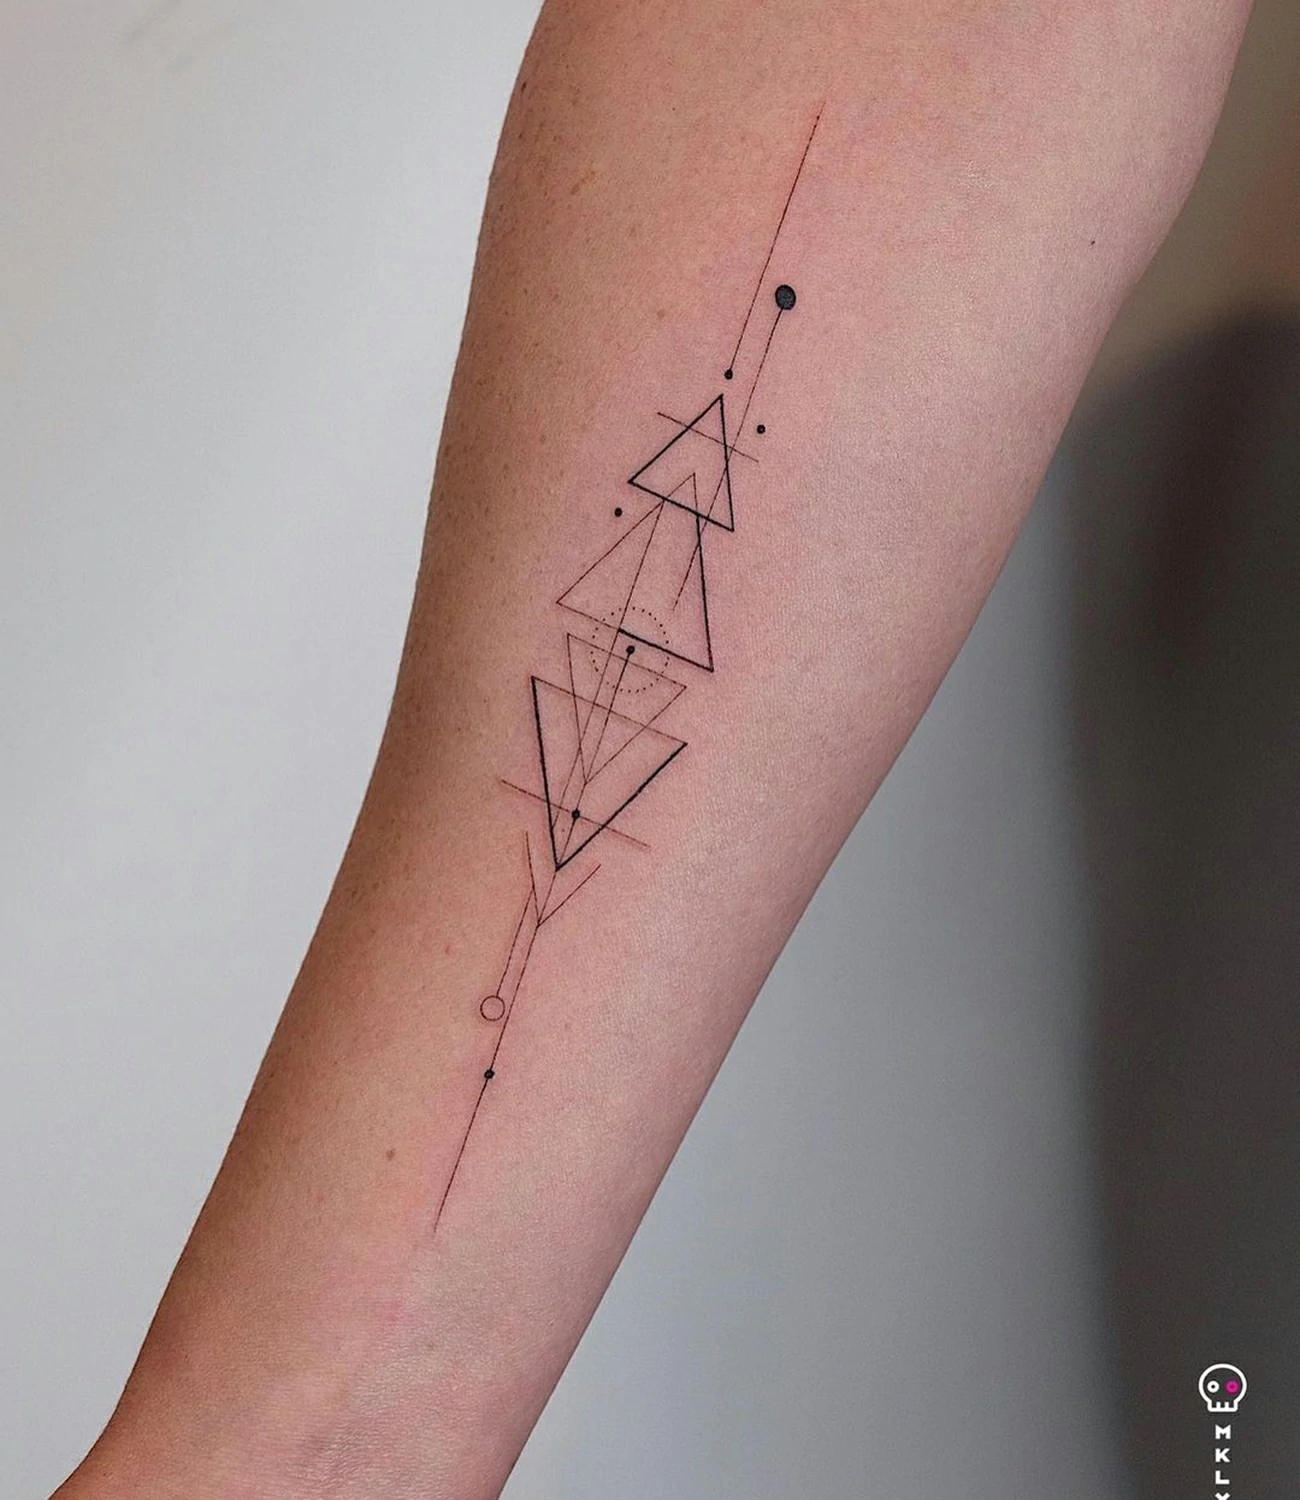 Geometric Minimalist Tattoo: Geometric minimalist tattoos highlight the elegance of clean lines and basic shapes, emphasizing the beauty of simplicity.